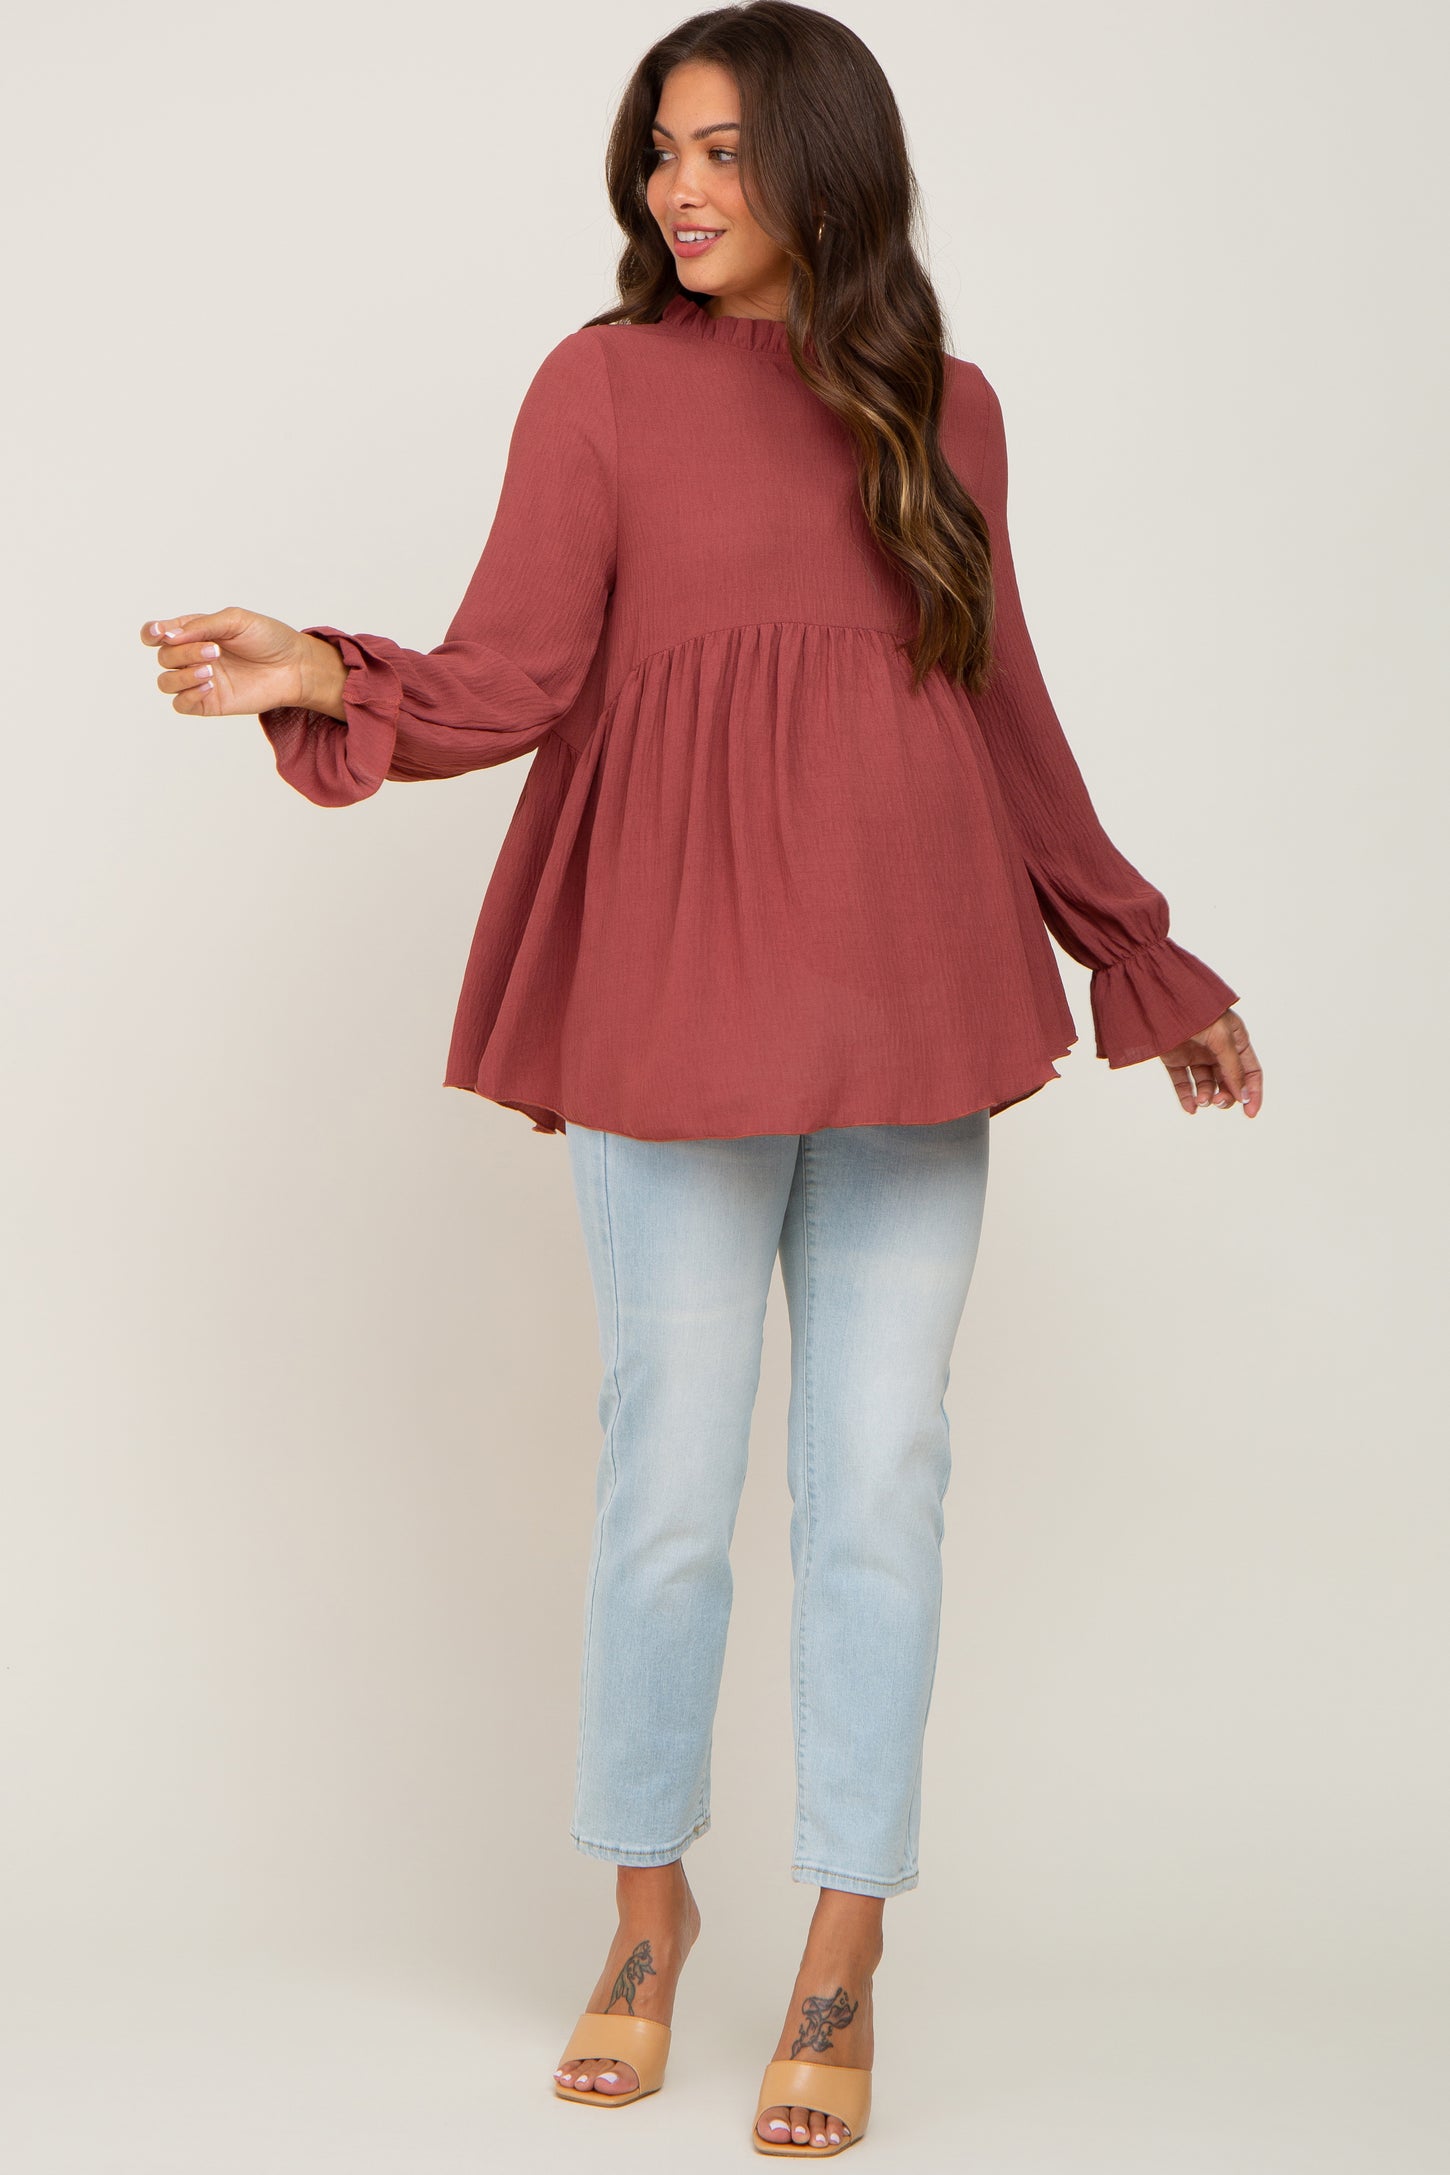 The Cutest One Shouldered, Ruffled Top On Sale For $38 + These